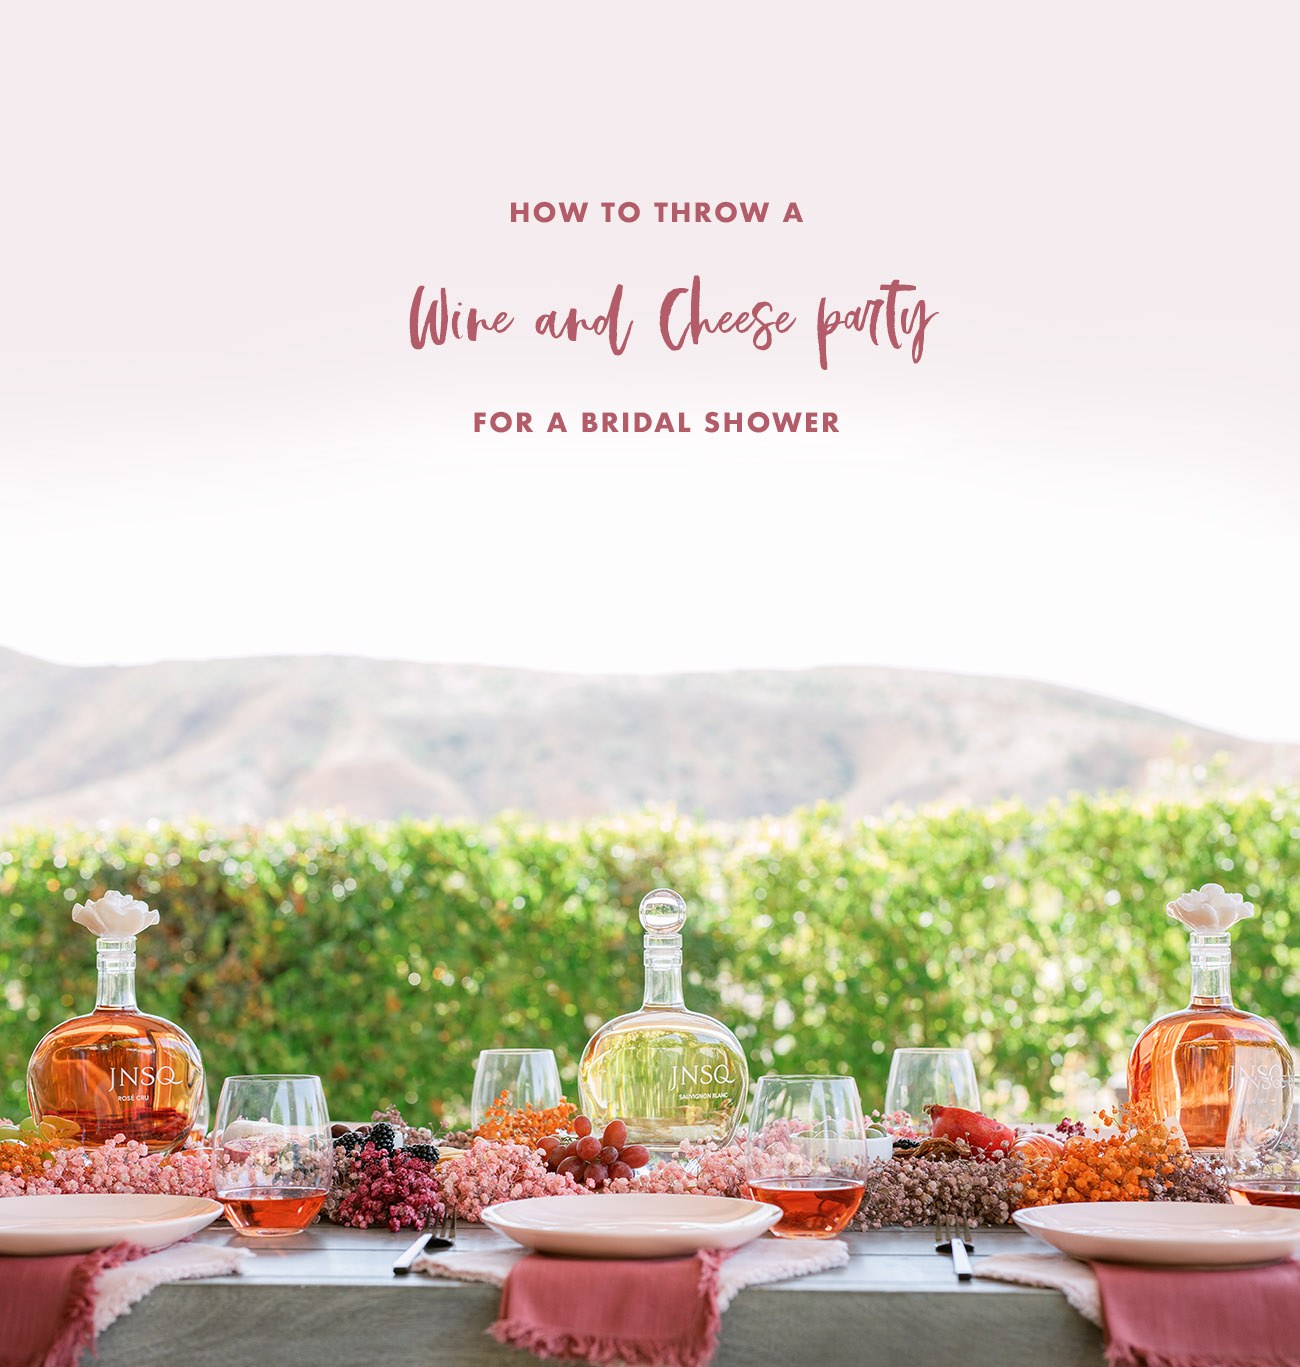 How to Throw a Wine and Cheese Party for a Bridal Shower